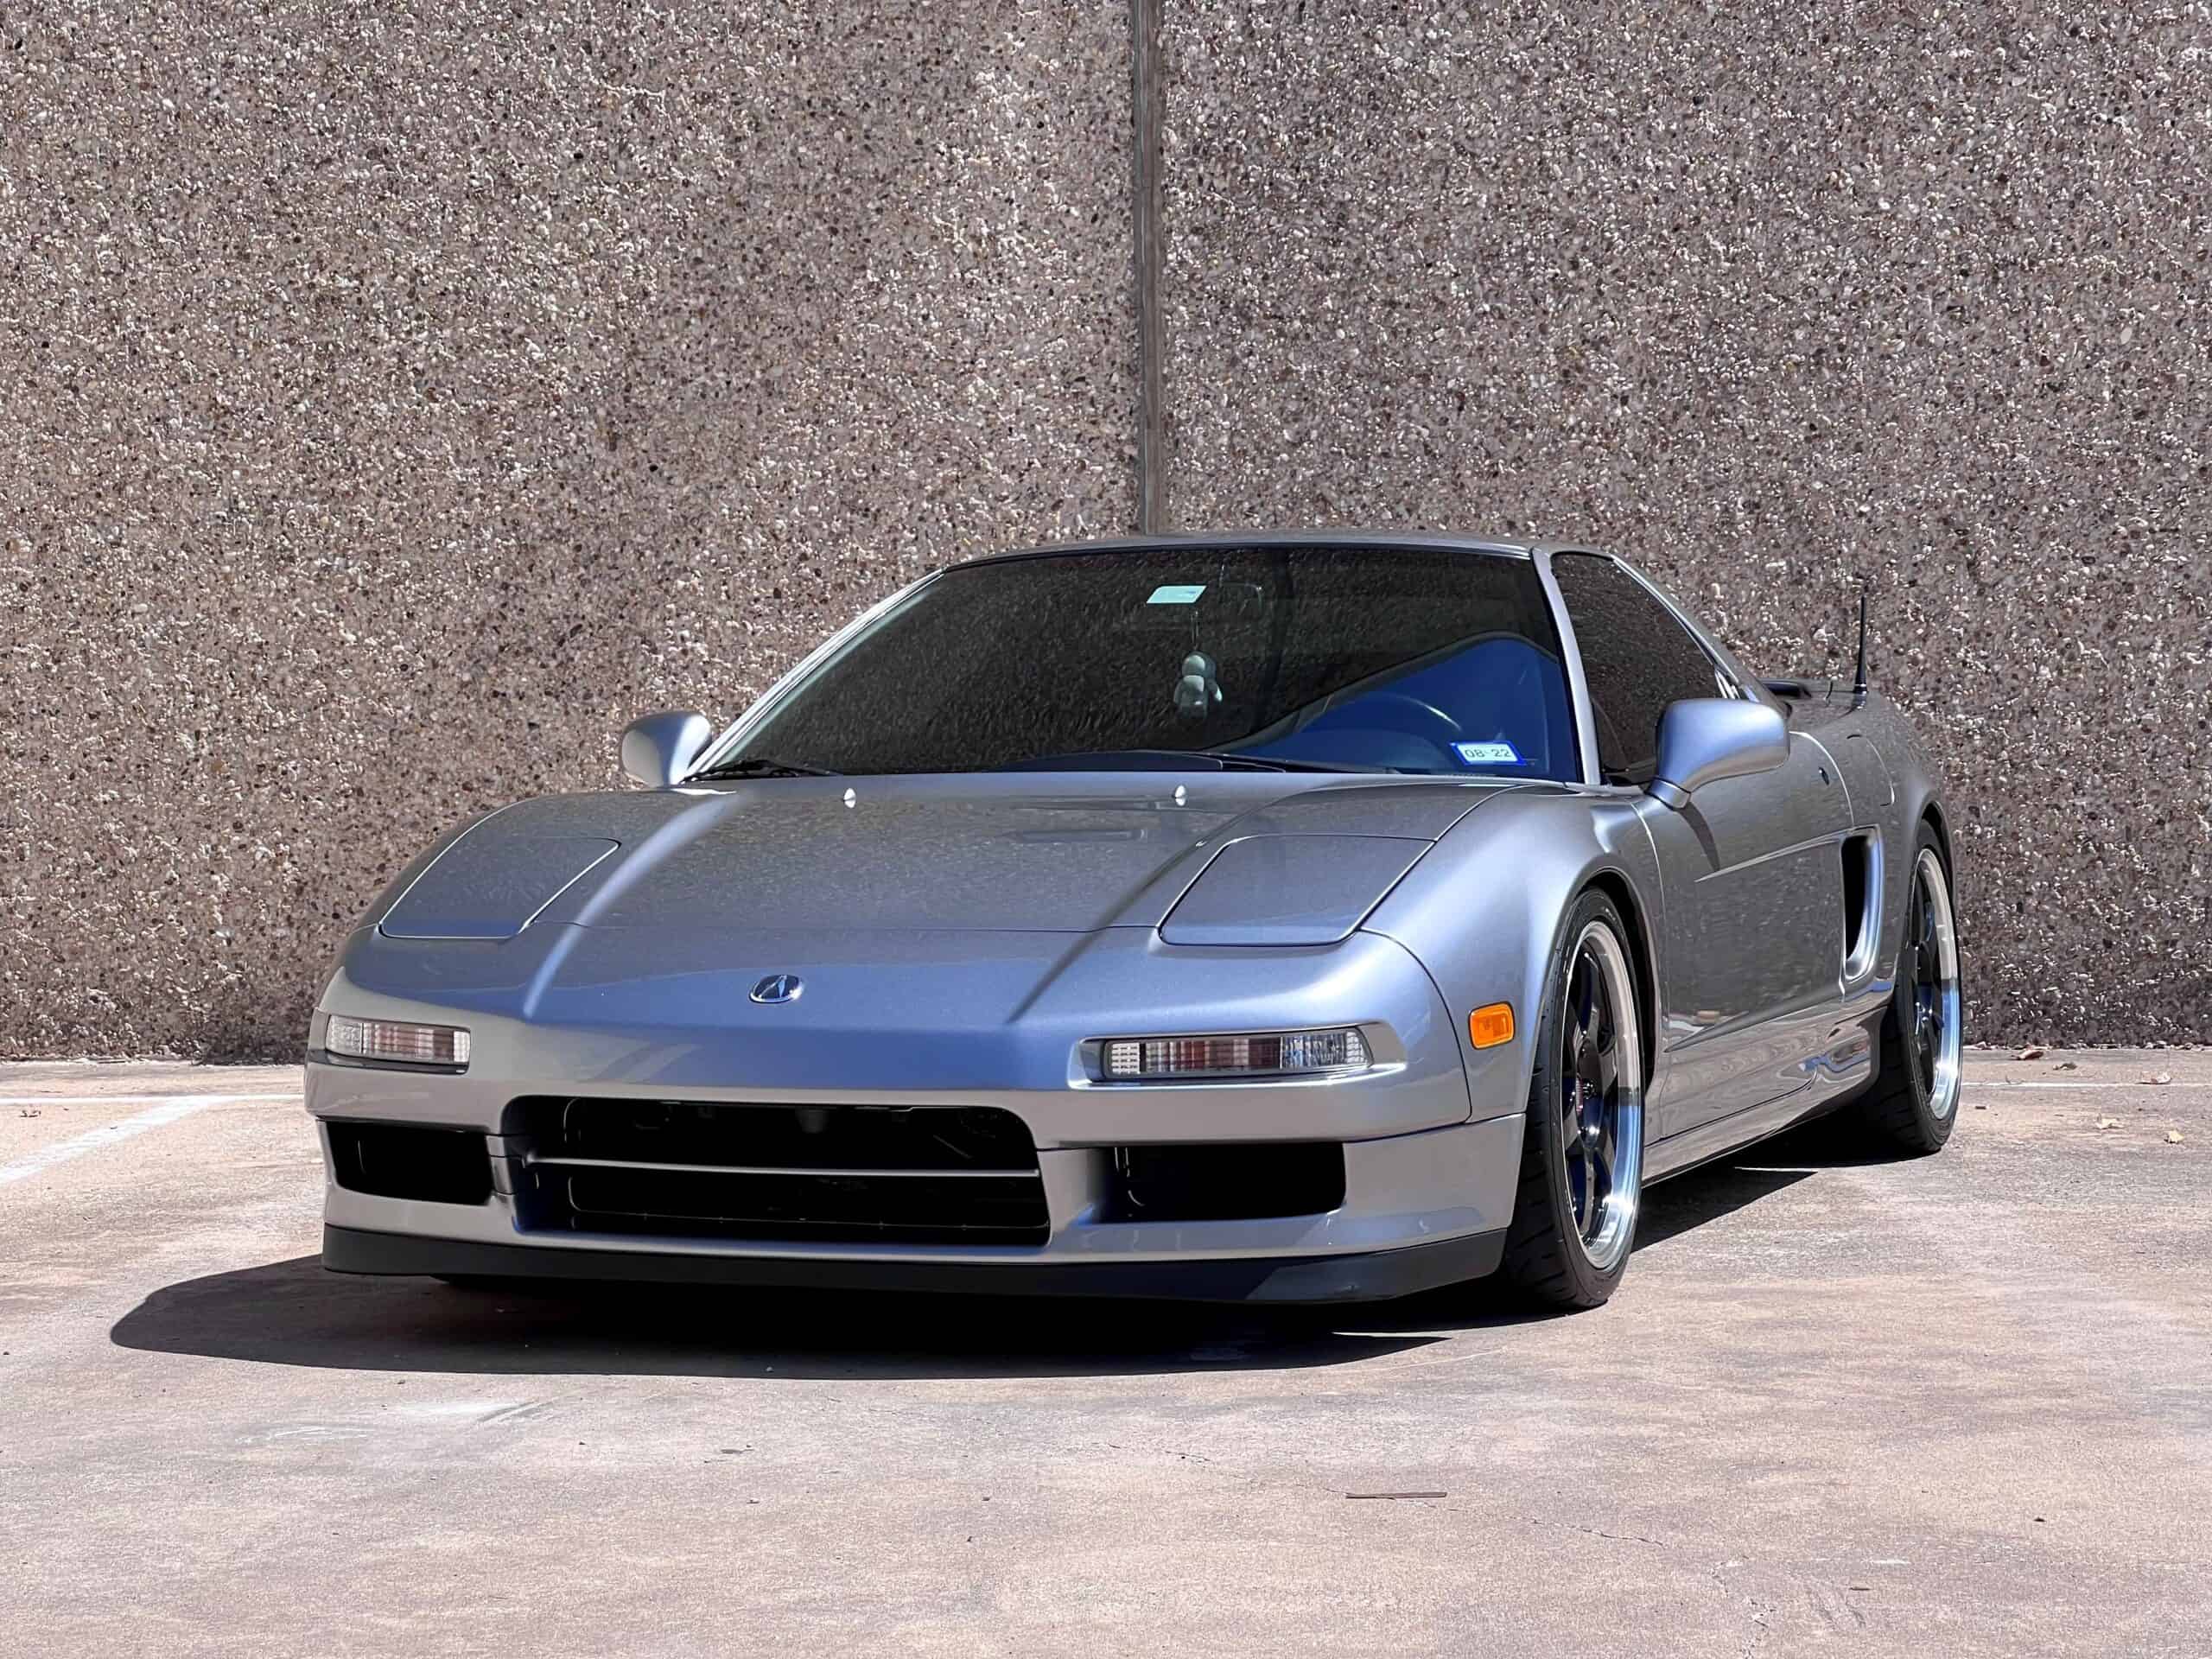 2000 Acura NSX full front ultimate plus rocker ppf 2